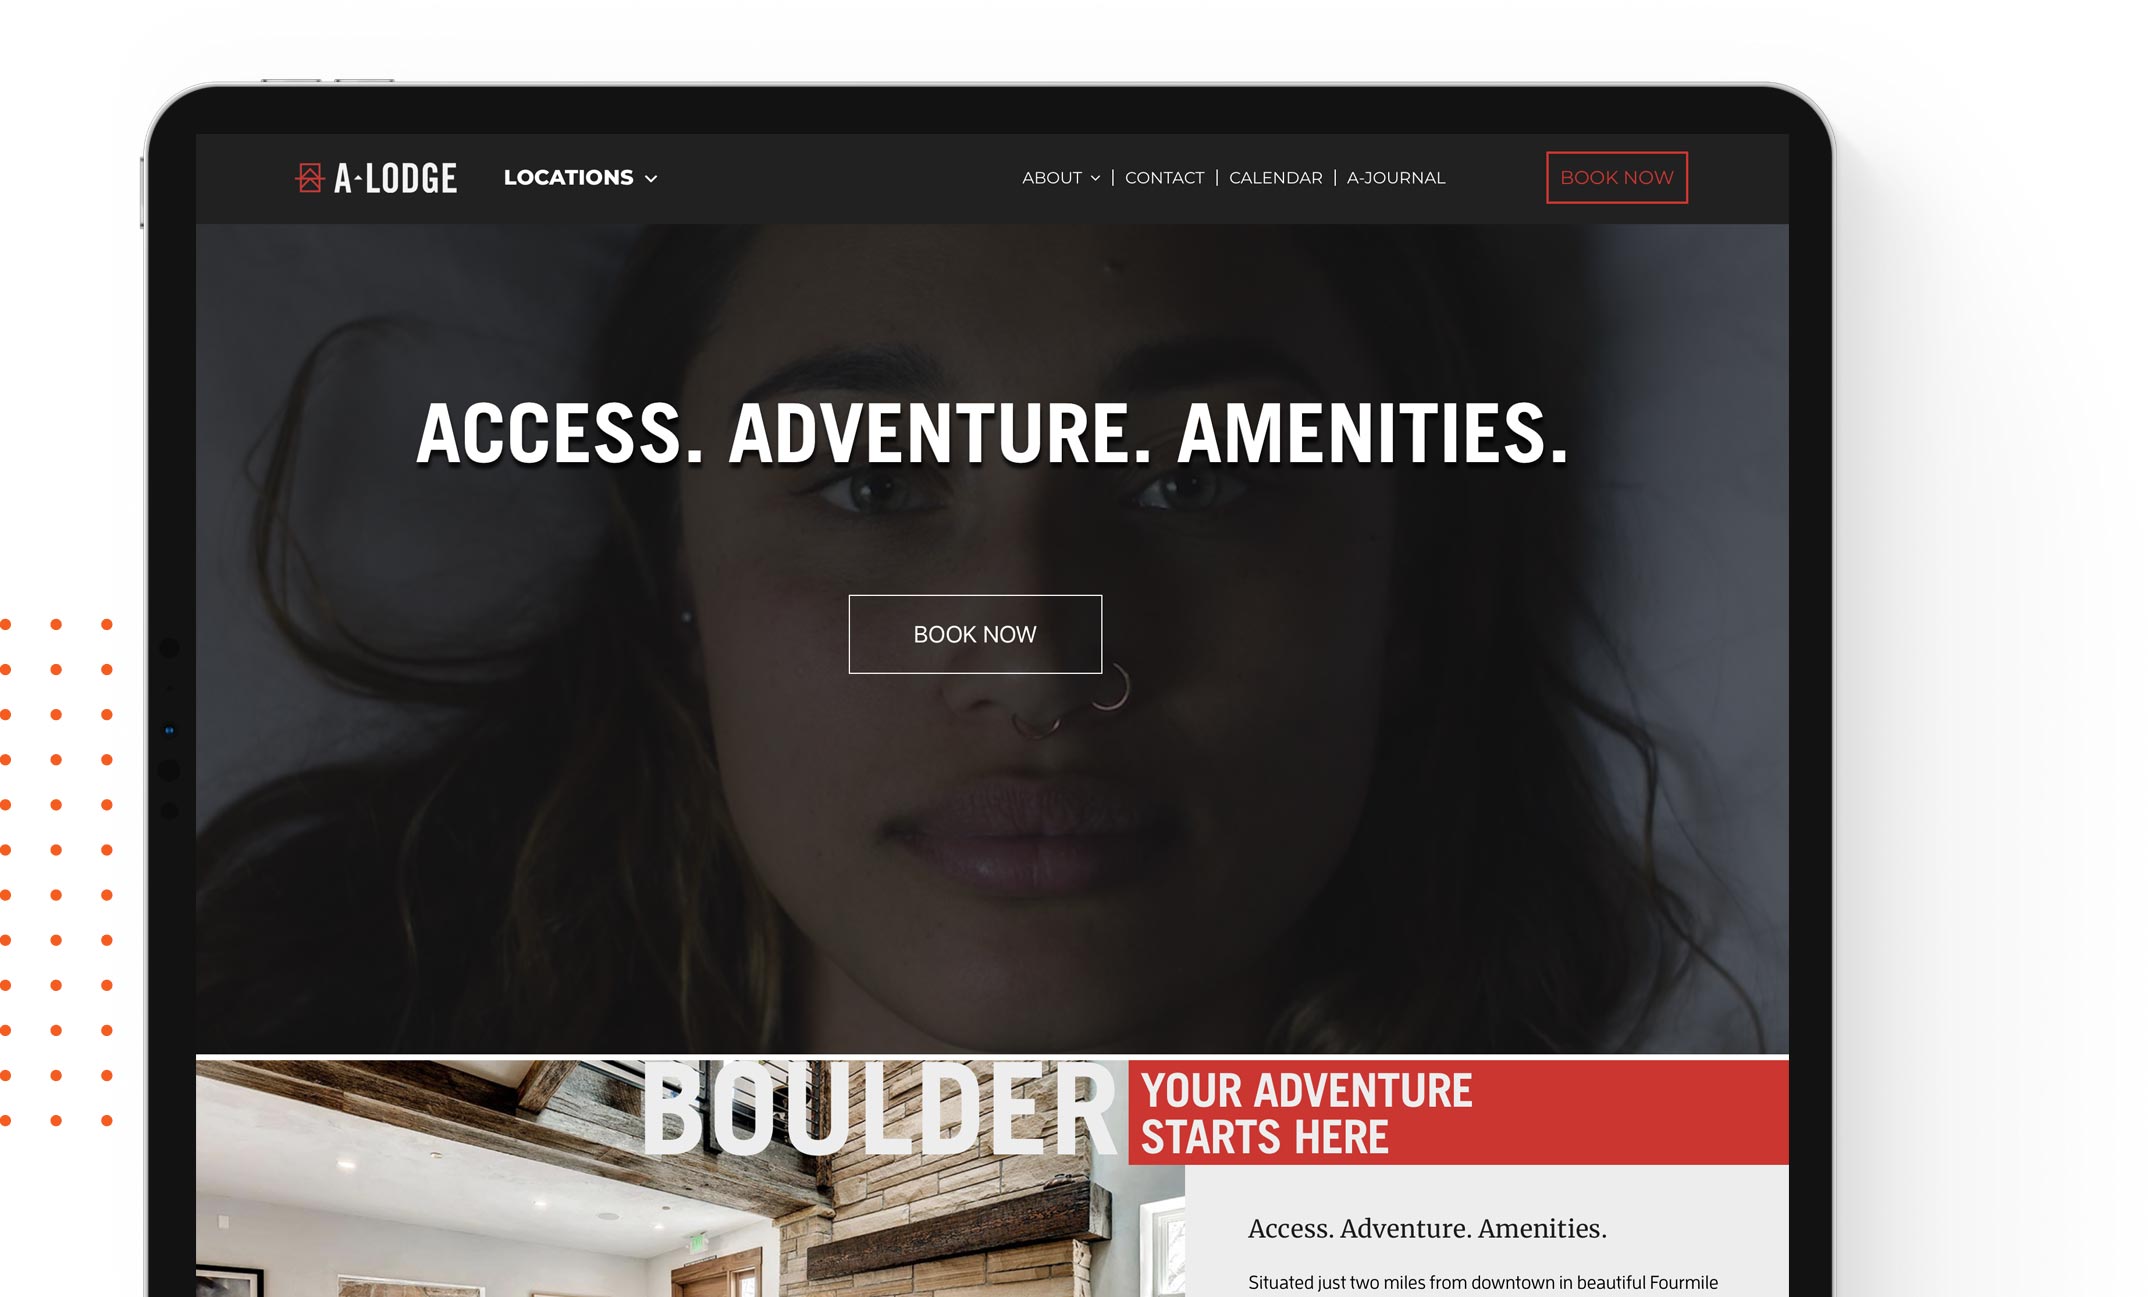 Web design example for Roaring Media of A-Lodge